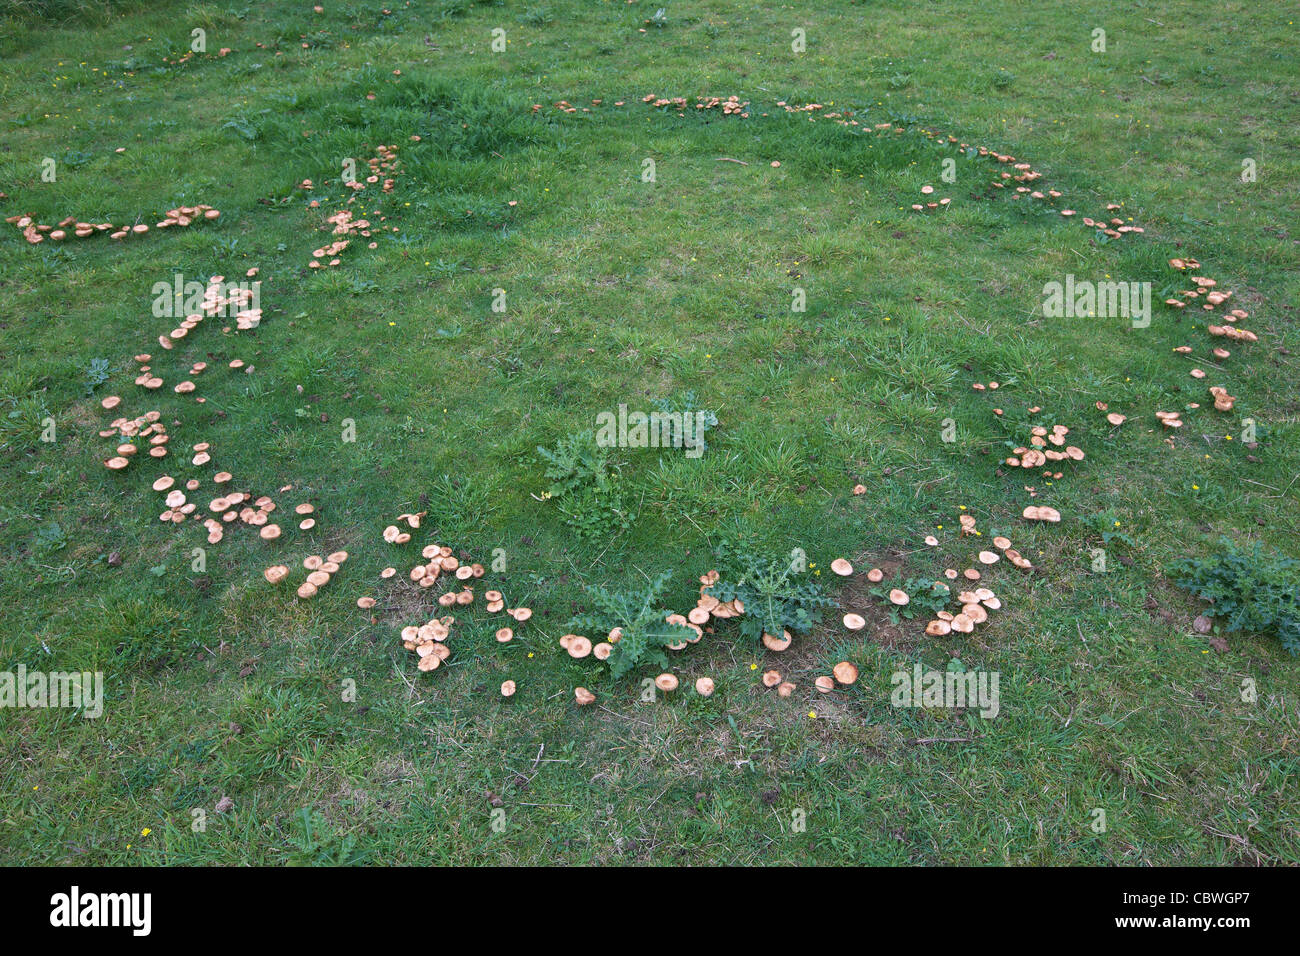 Fairy ring of mushrooms in a meadow, UK, growing in a circle Stock Photo